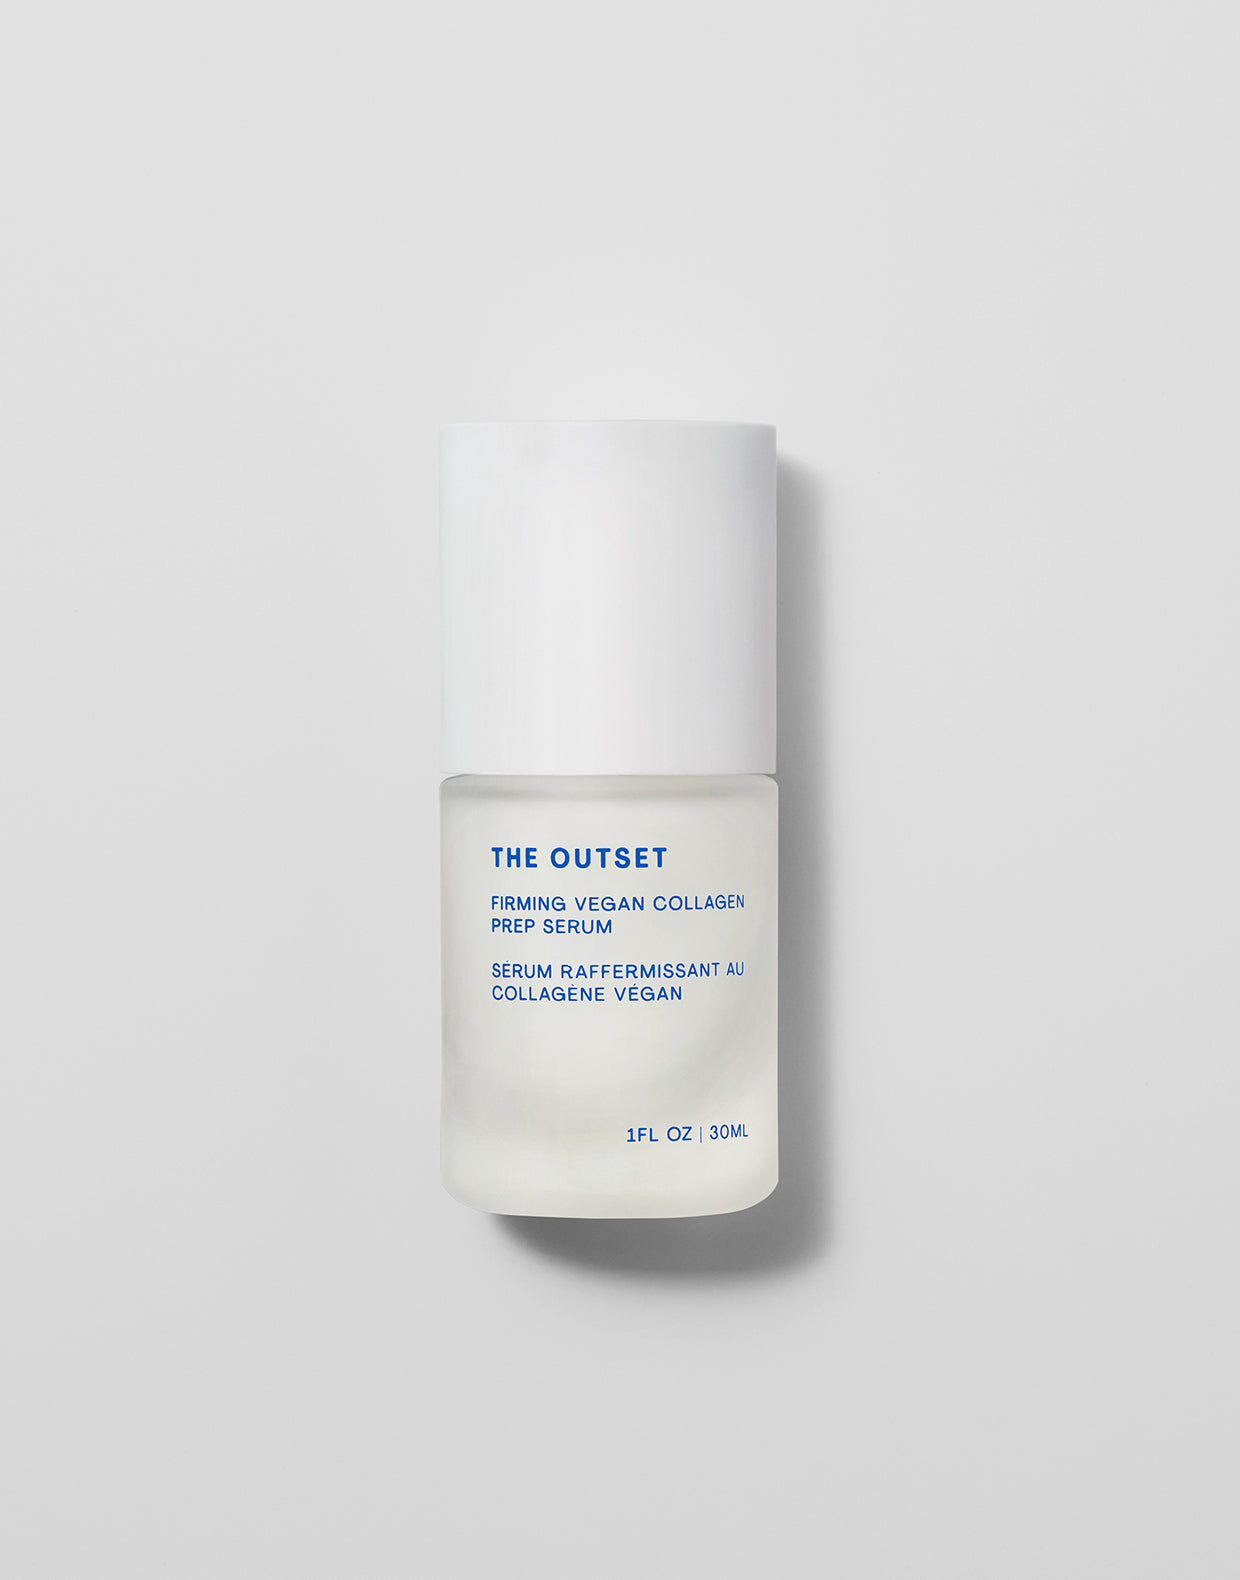 Front photo of The Outset's Firming Vegan Collagen Prep Serum with cap on